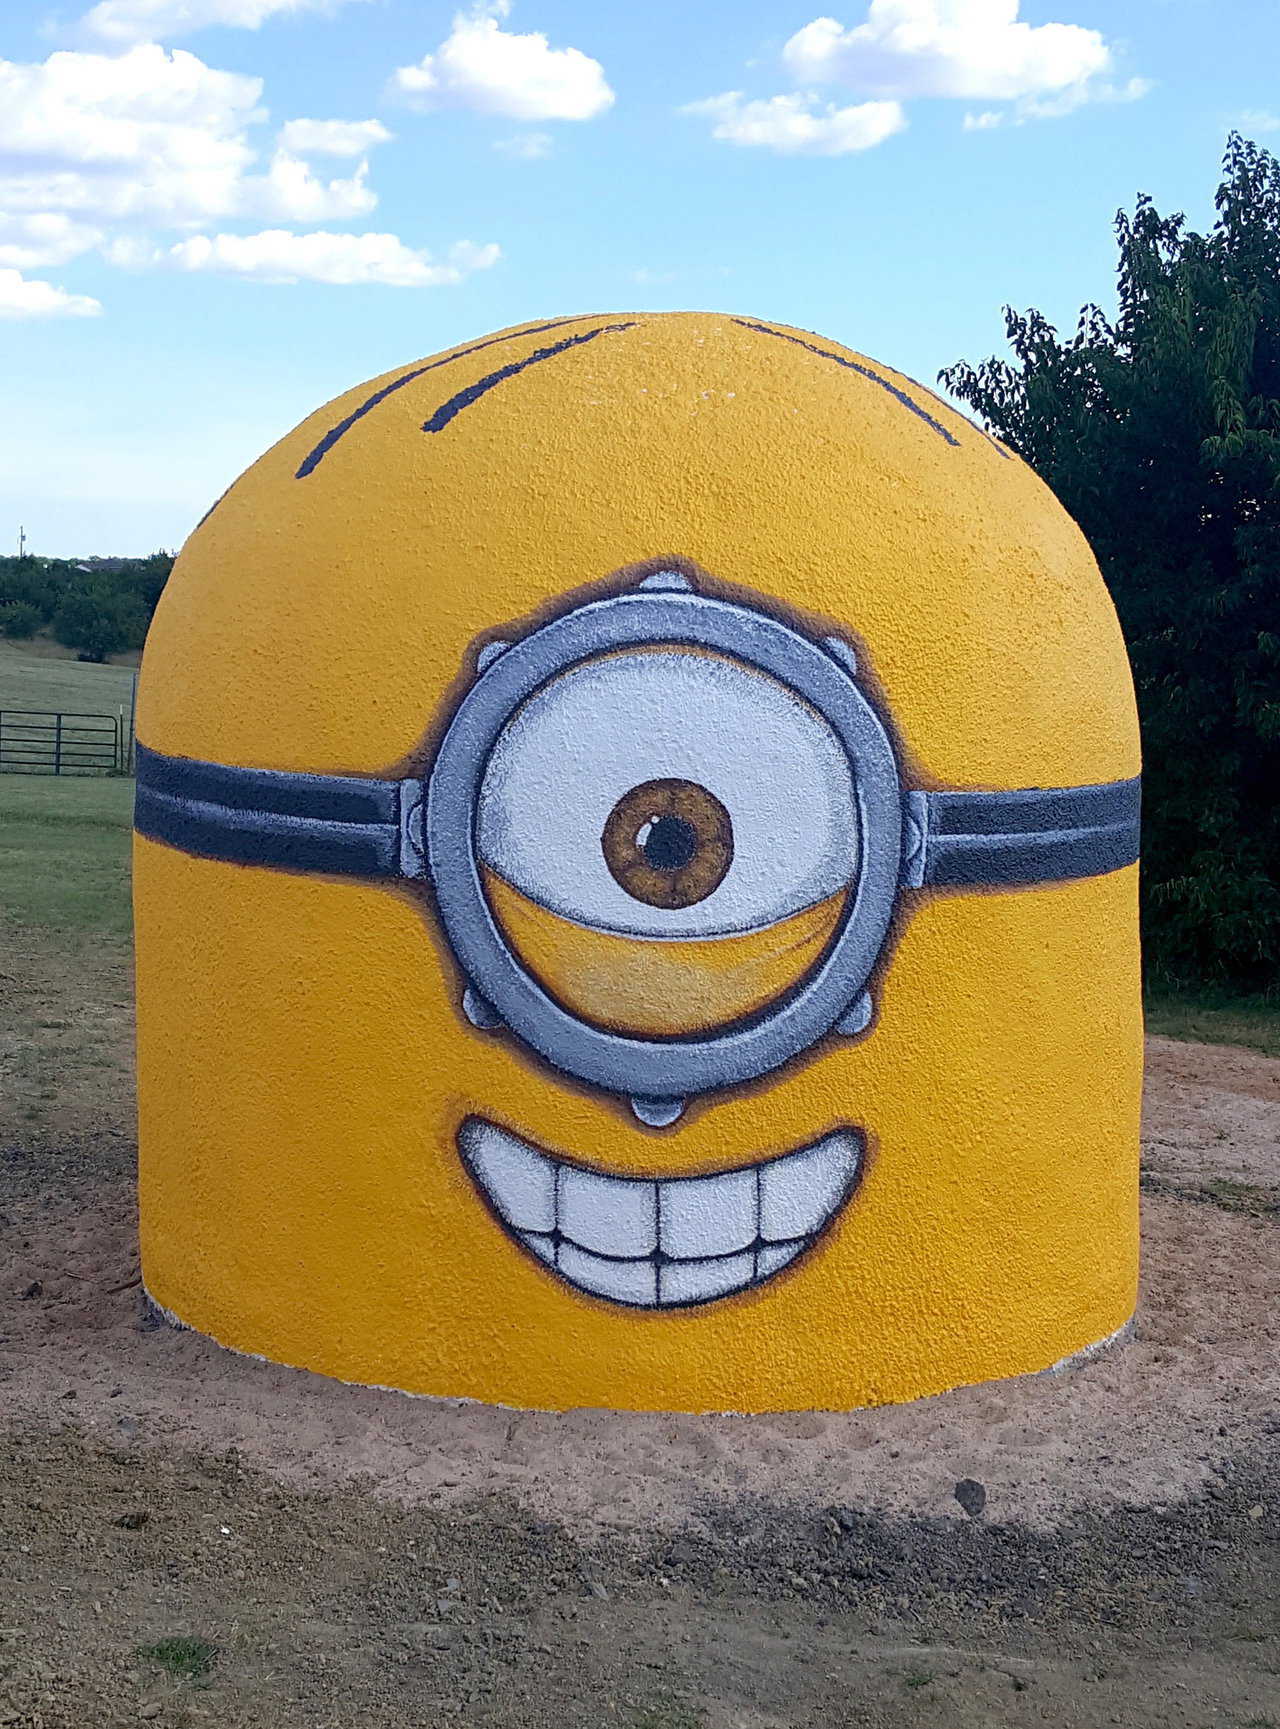 An Ecoshell tornado shelter painted as a Minion from Despicable Me.